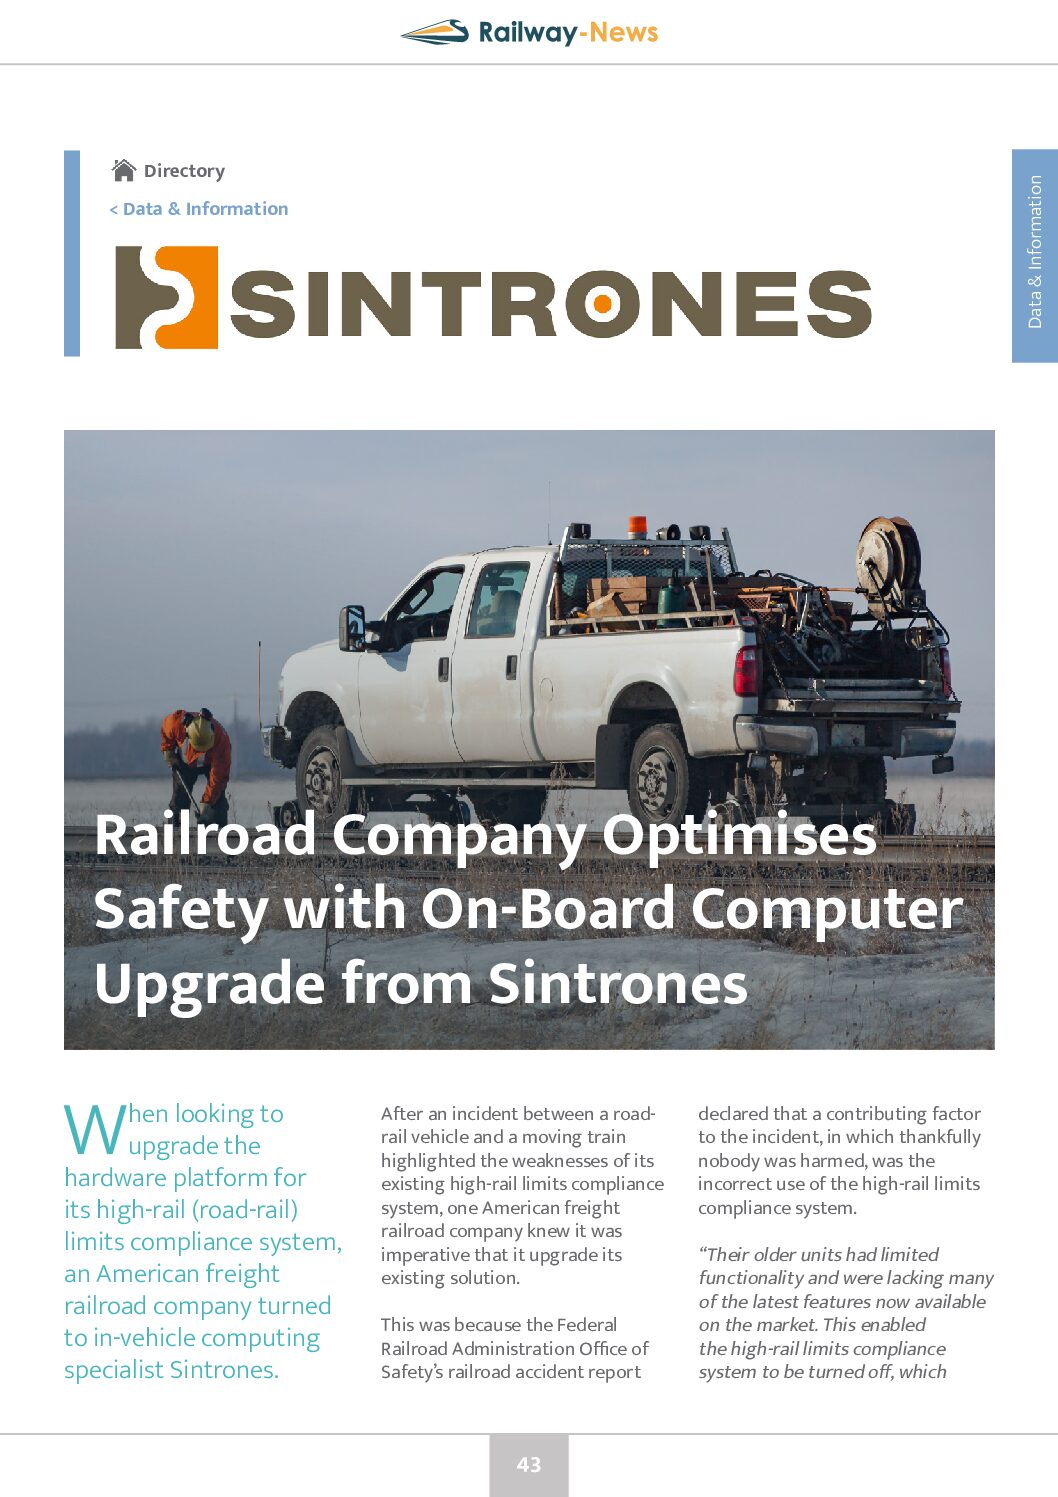 Sintrones Optimises Safety with On-Board Computer Upgrade 